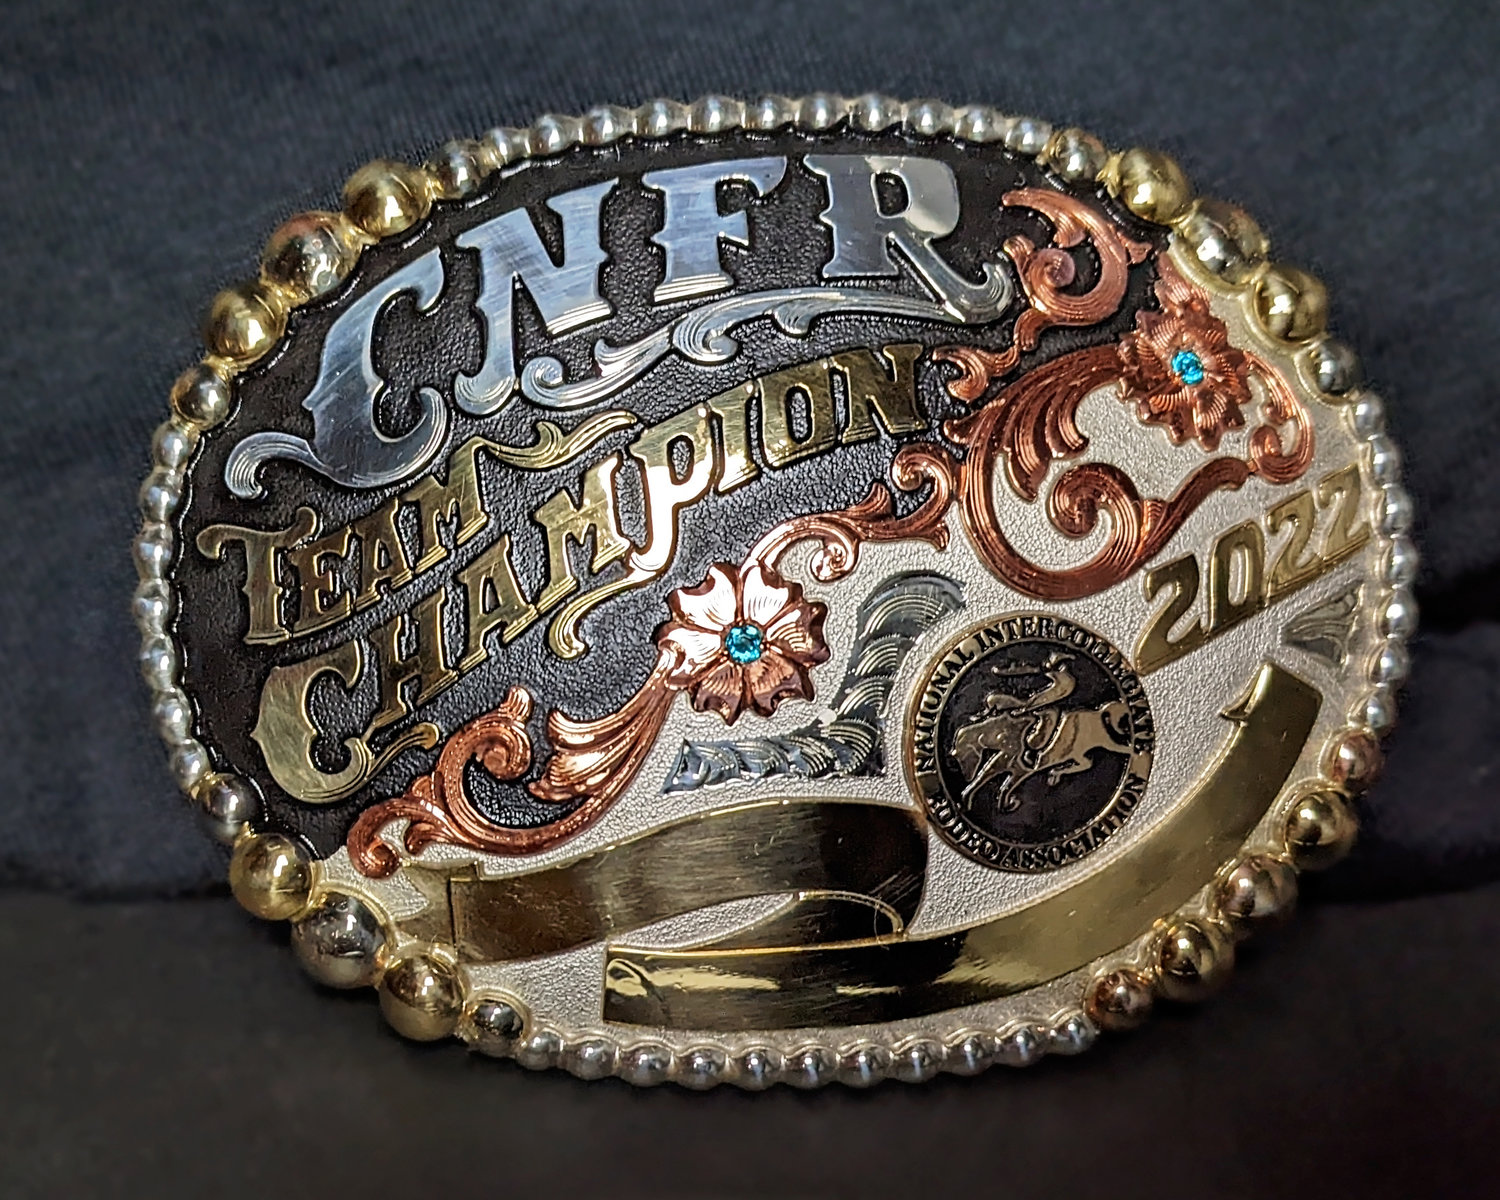 The College National Finals Rodeo belt buckle for the Weatherford College championship